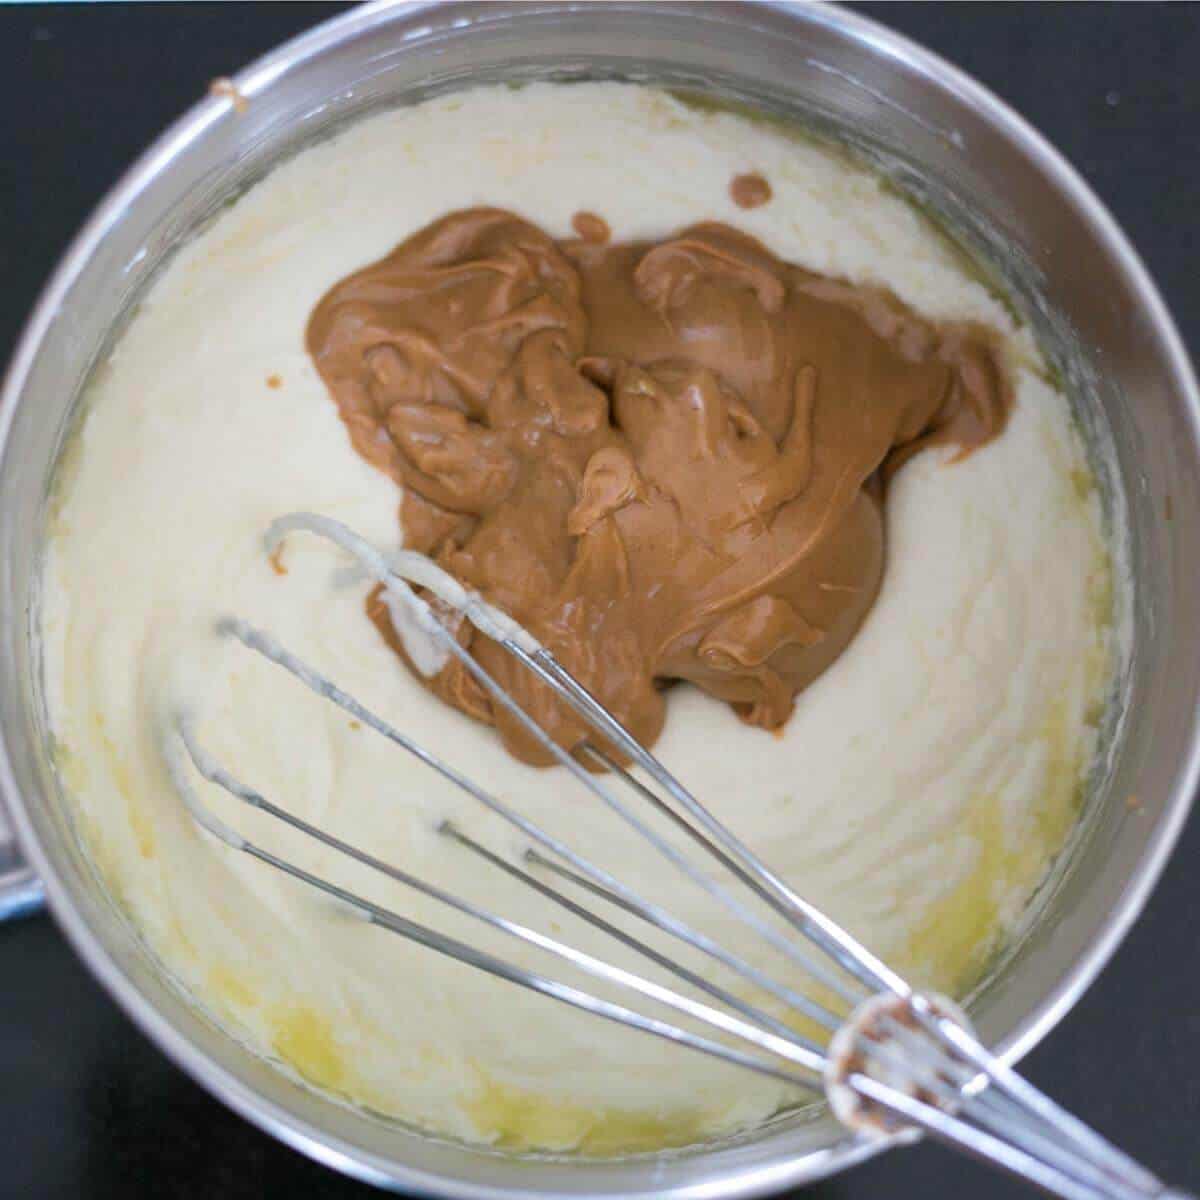 adding the peanut butter to fudge mix